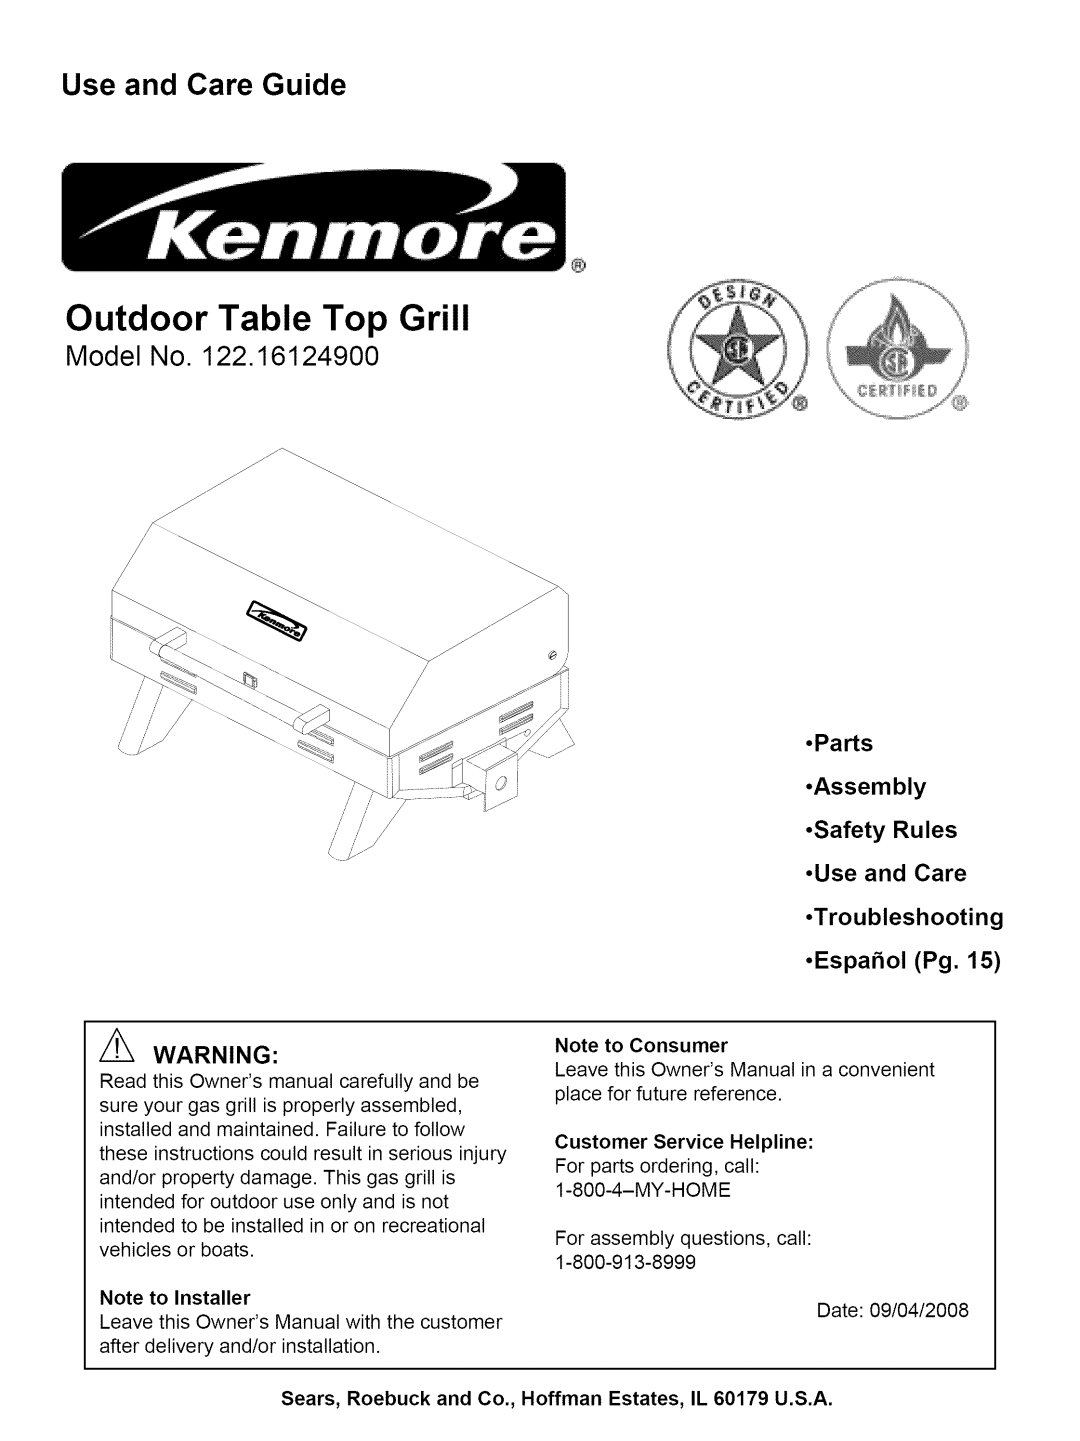 Kenmore 122.161249 owner manual Outdoor Table Top Grill, Use and Care Guide, z WARNING, Parts, Note to Installer 